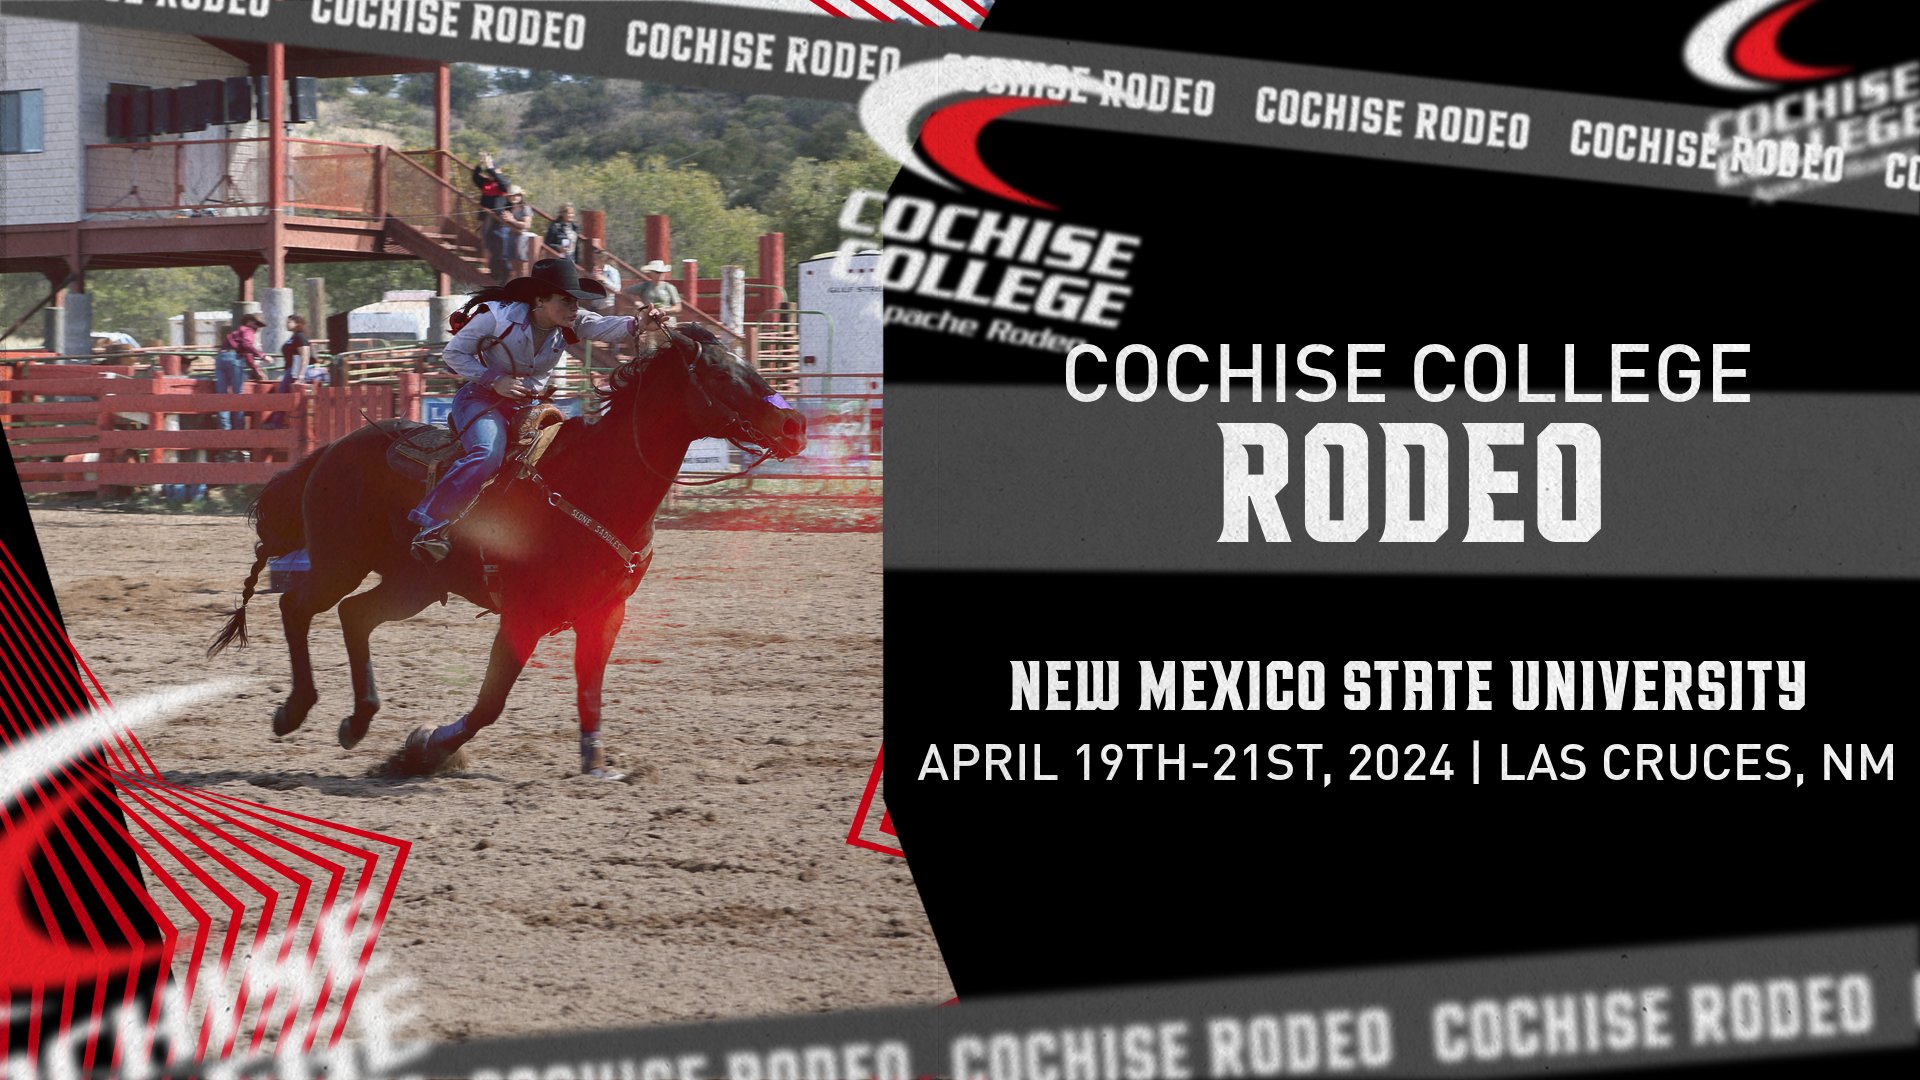 Cochise at New Mexico State University